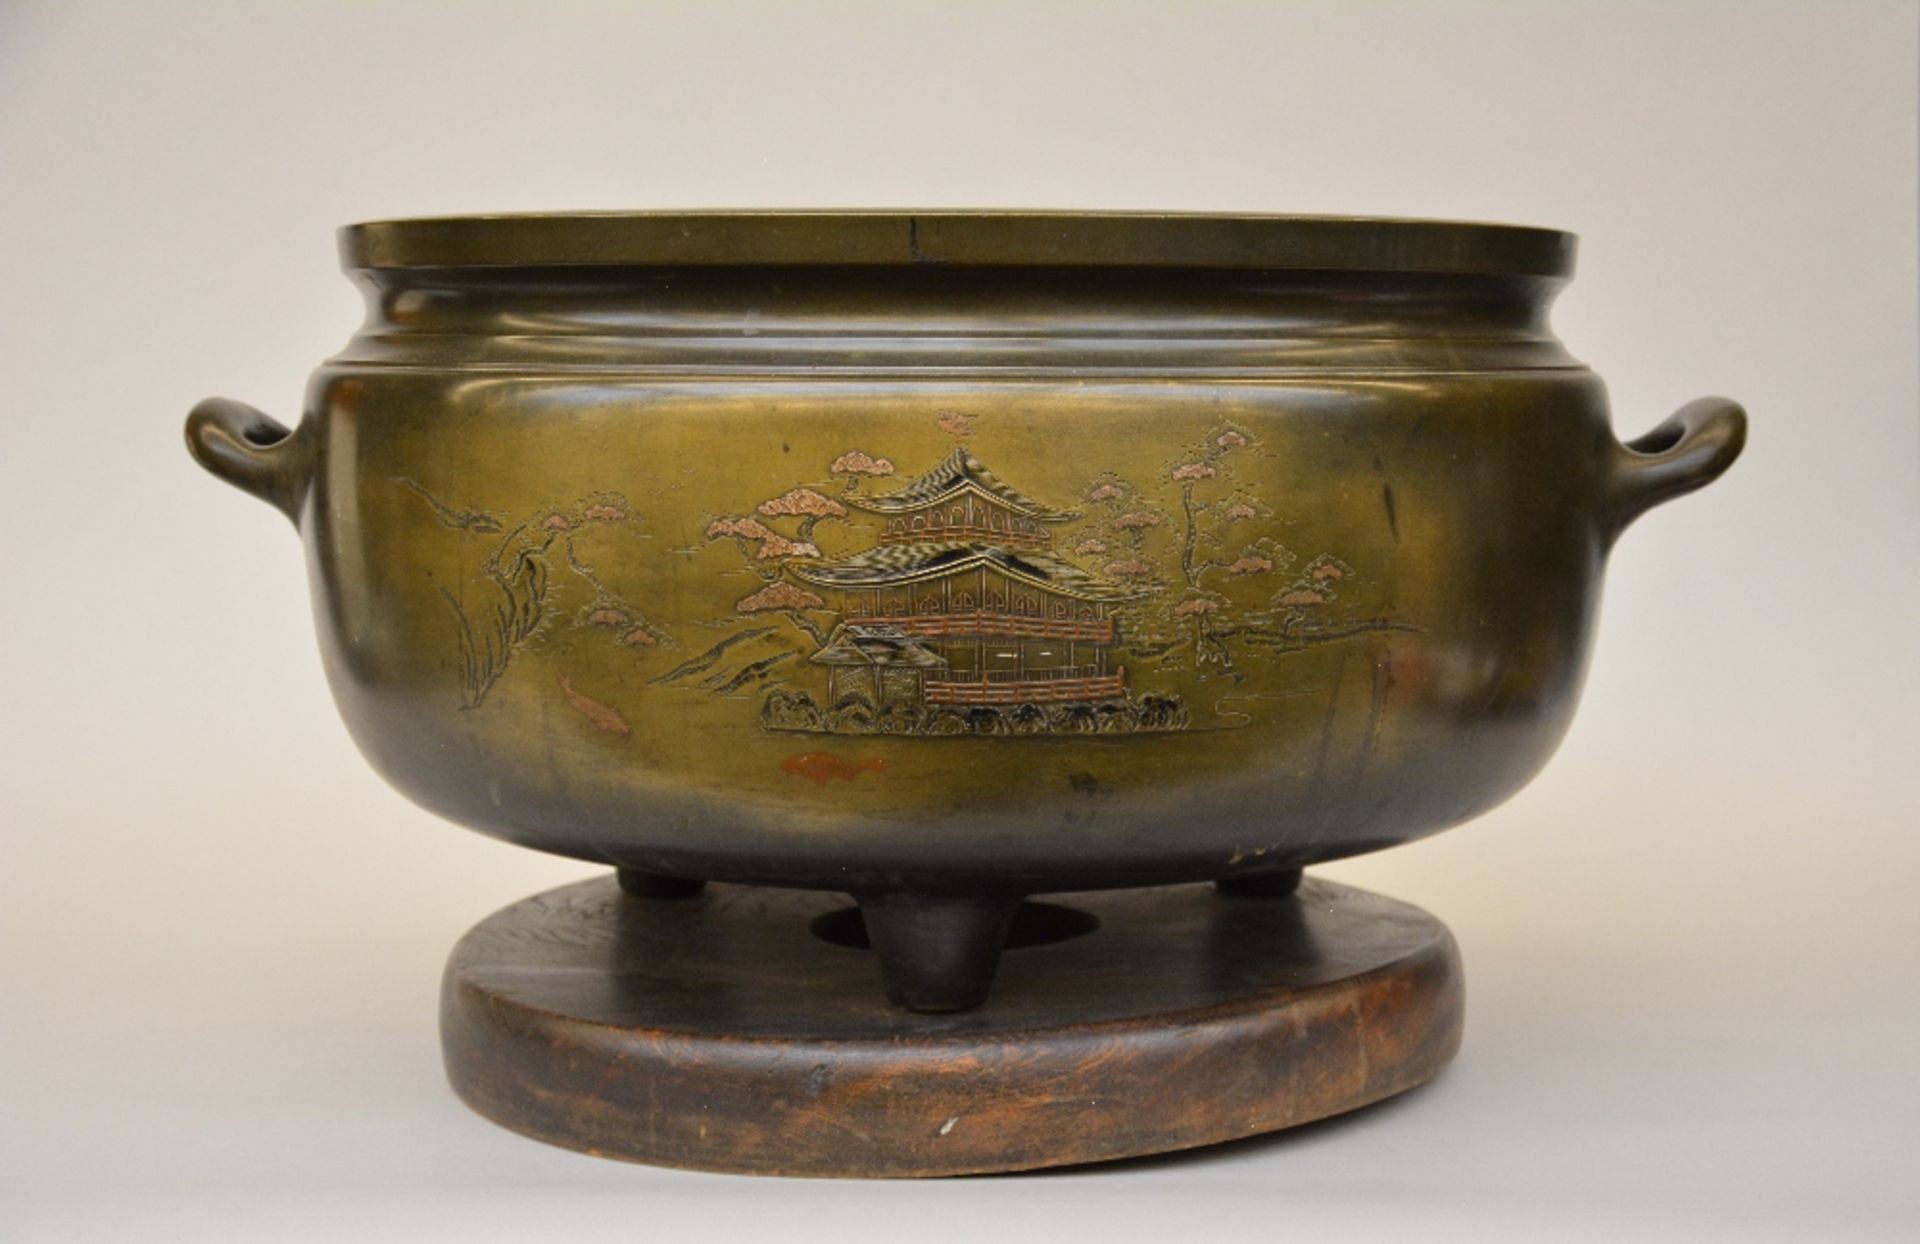 An exceptional Japanese bronze incense burner on a wooden base, late Edo period, H 36,5 - W 70 cm (